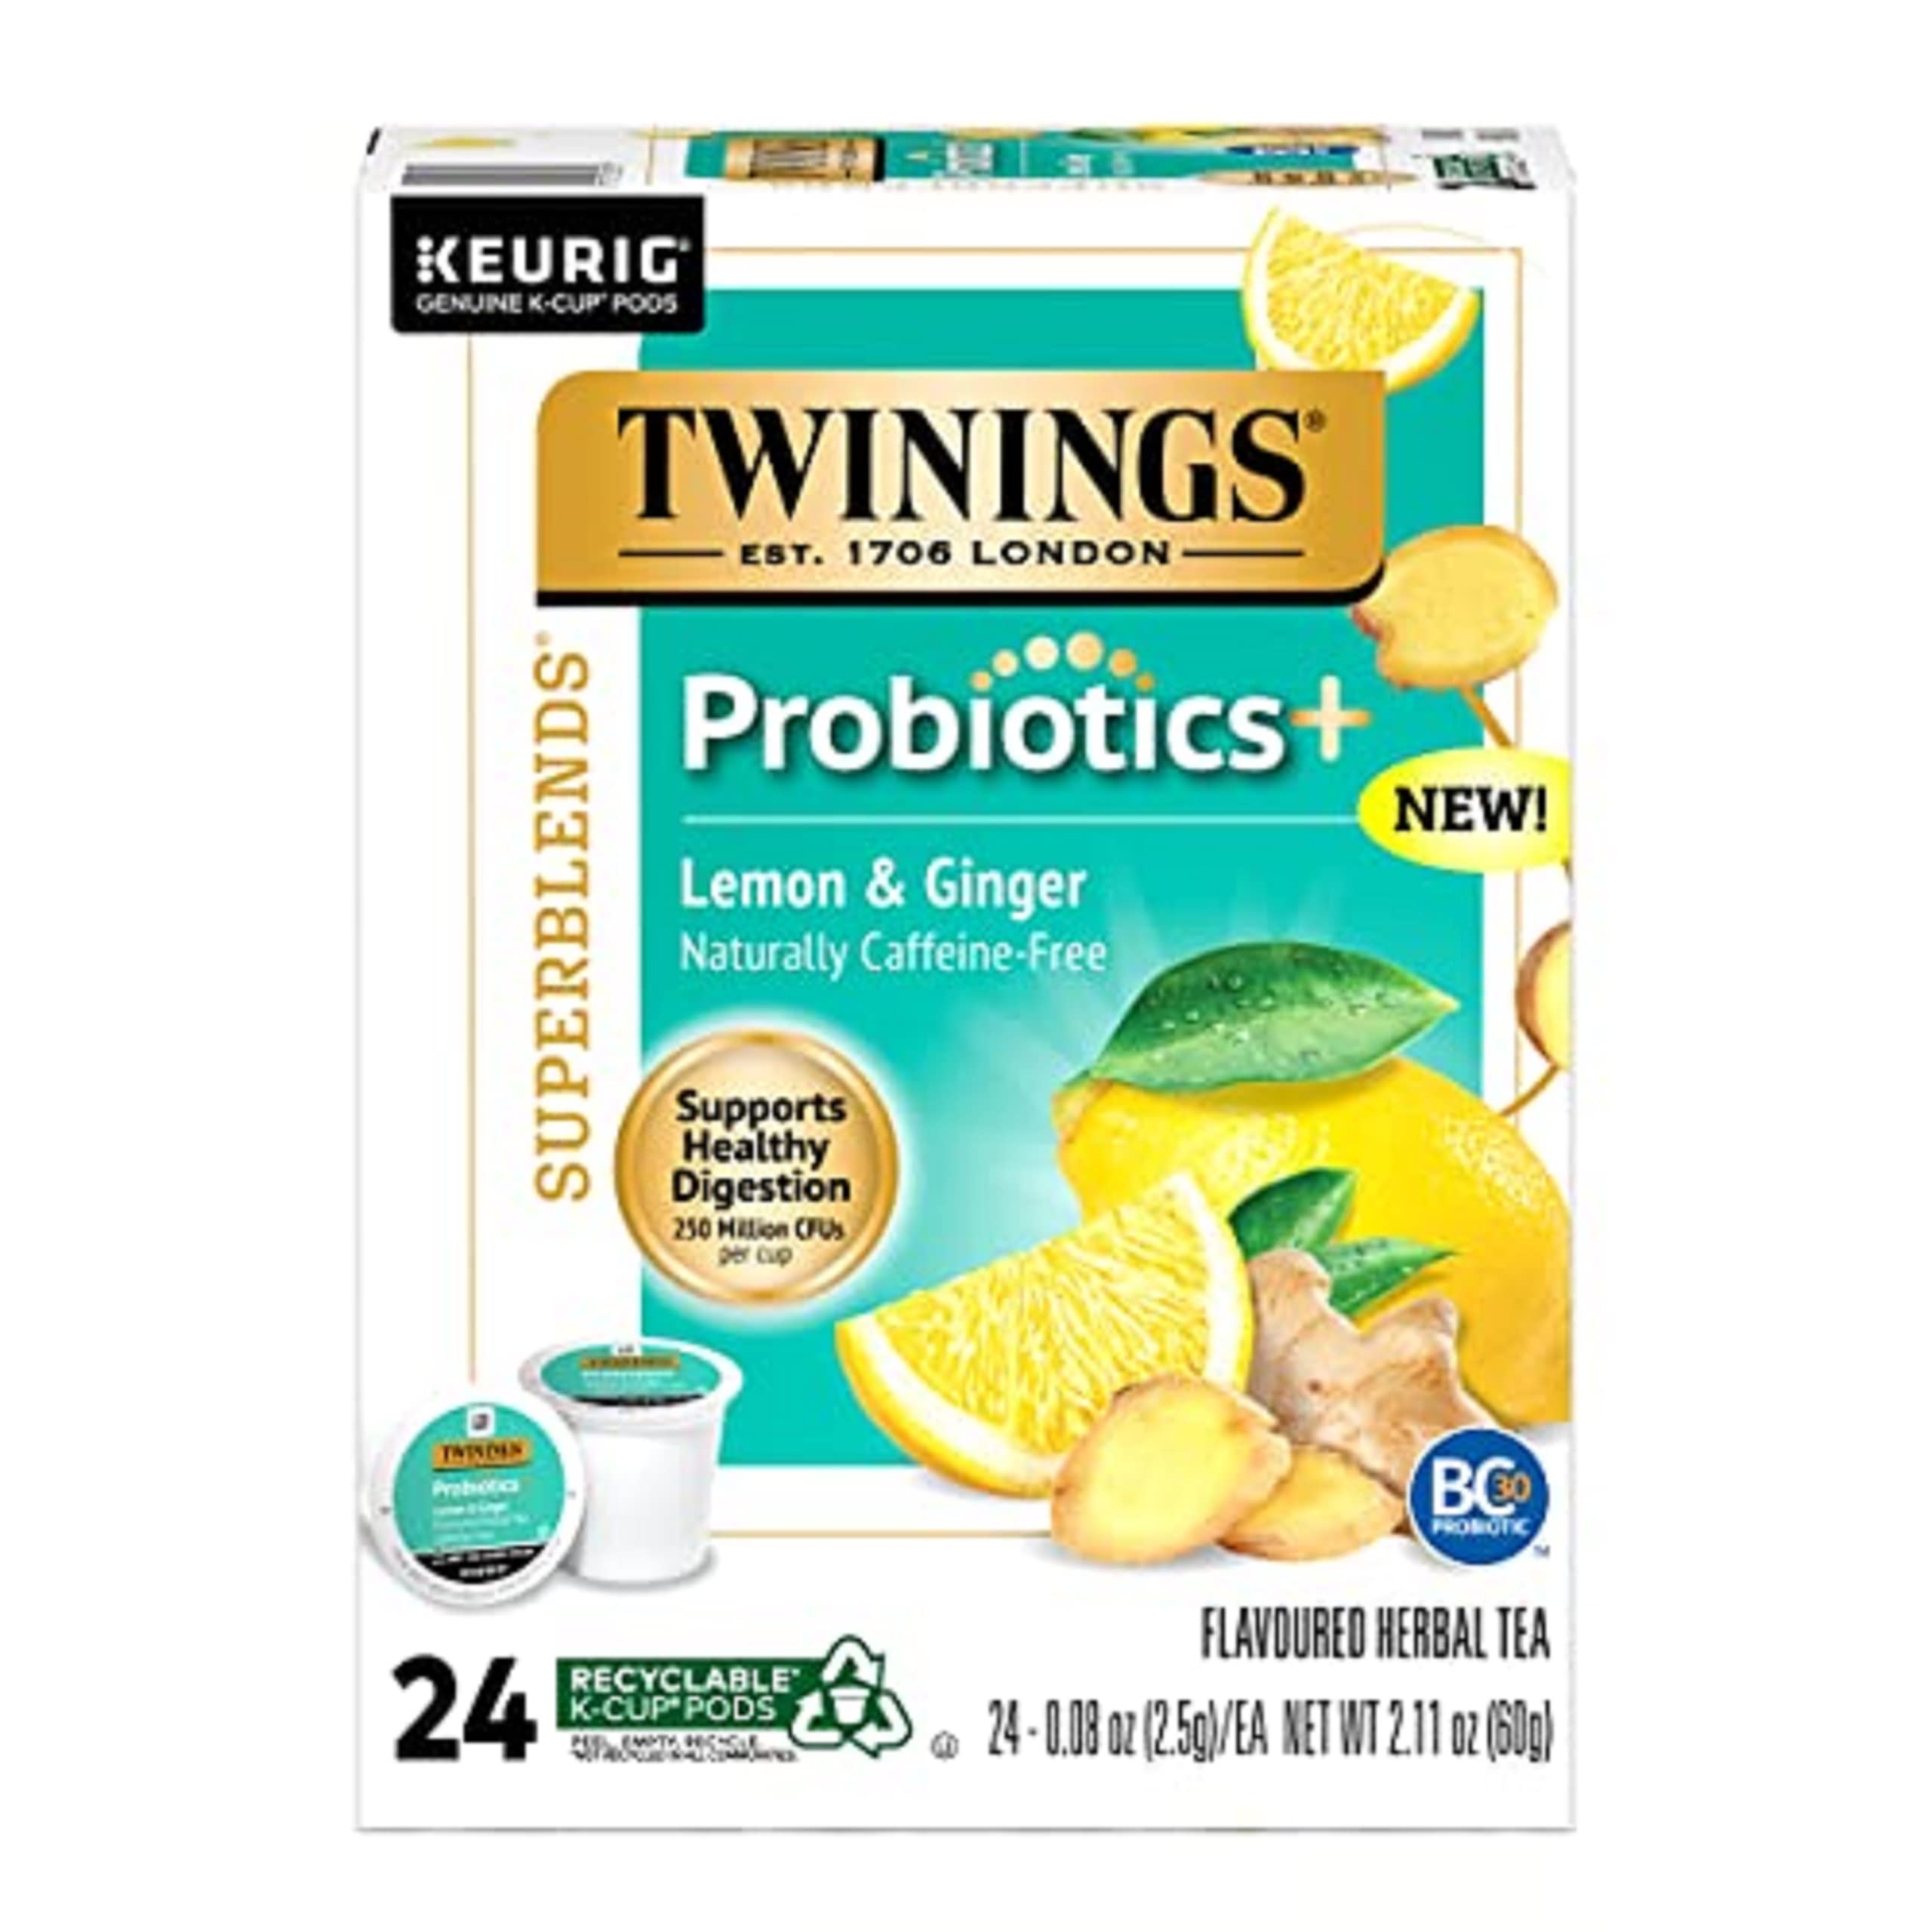 24-Count Twinings K-Cup Pods for Keurig Herbal Tea (Probiotics+ Lemon & Ginger) $5.63 w/ S&S + Free Shipping w/ Prime or on $35+ $10.52